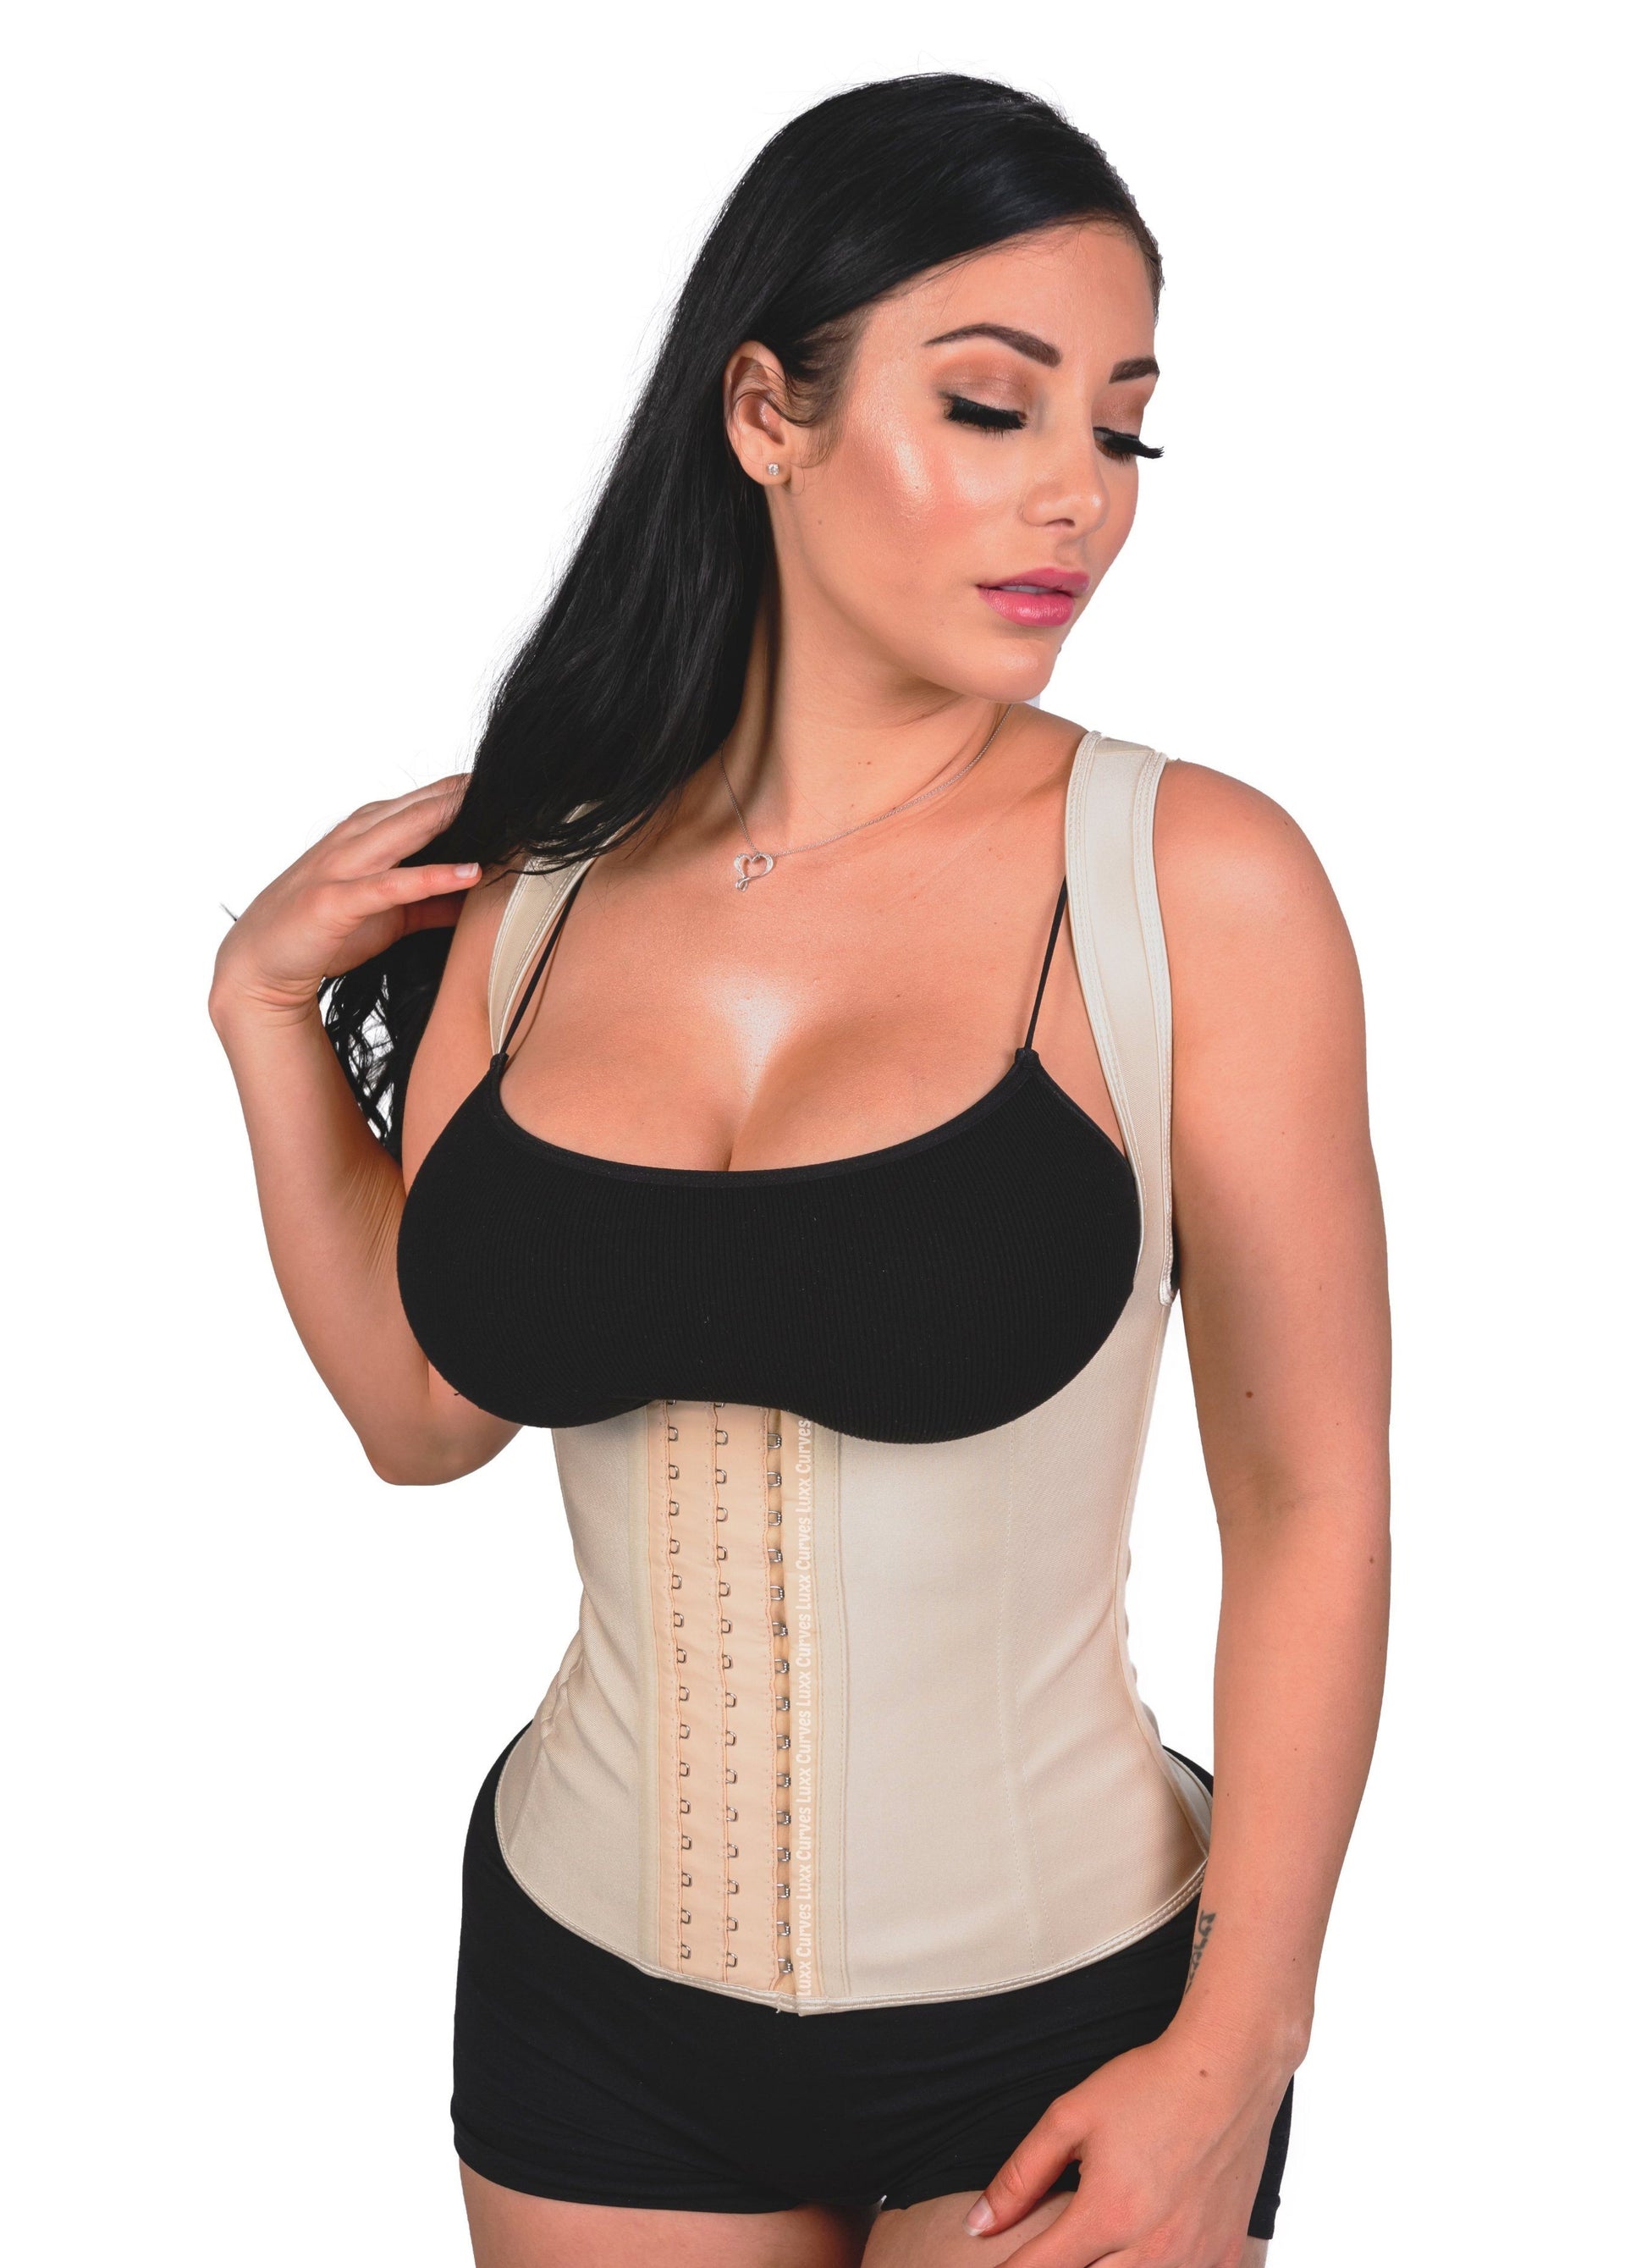 Luxx Curves - Result in waist training depends on how frequently you wear  your waist trainer, and being consistent makes your goal more realistic and  achievable.😊🙌 . It takes time and dedication